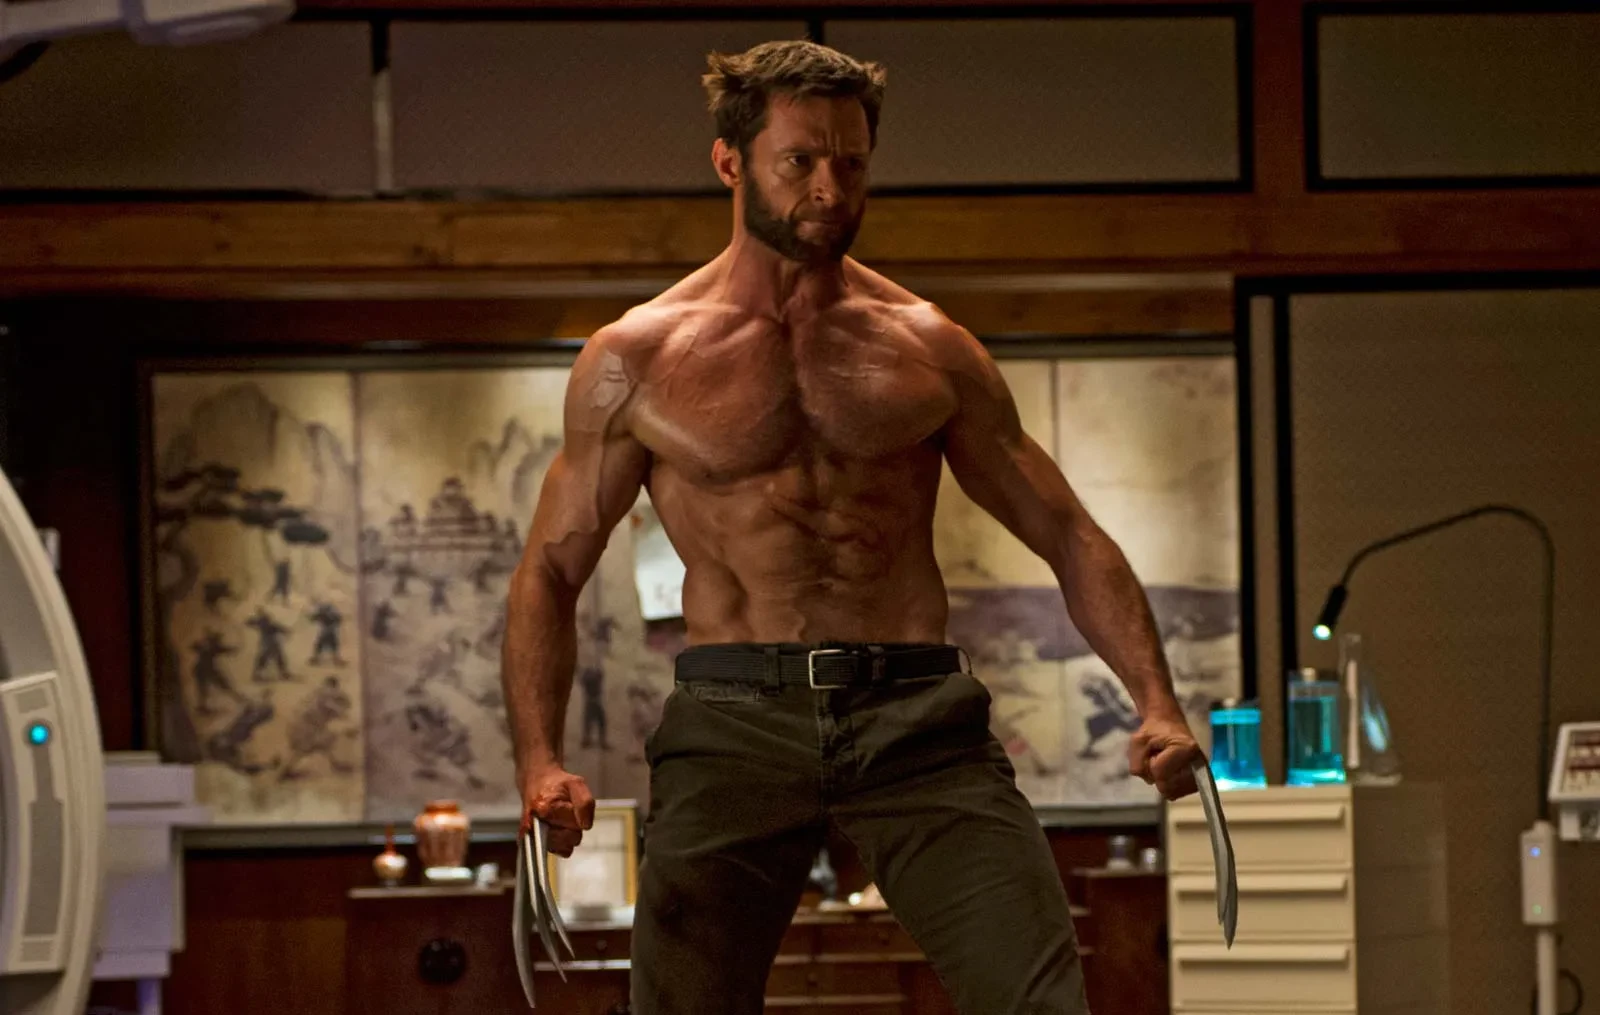 Ryan Reynolds’ Epic Stare-Down: Could He Outlast Hugh Jackman in Their Next Big Movie?